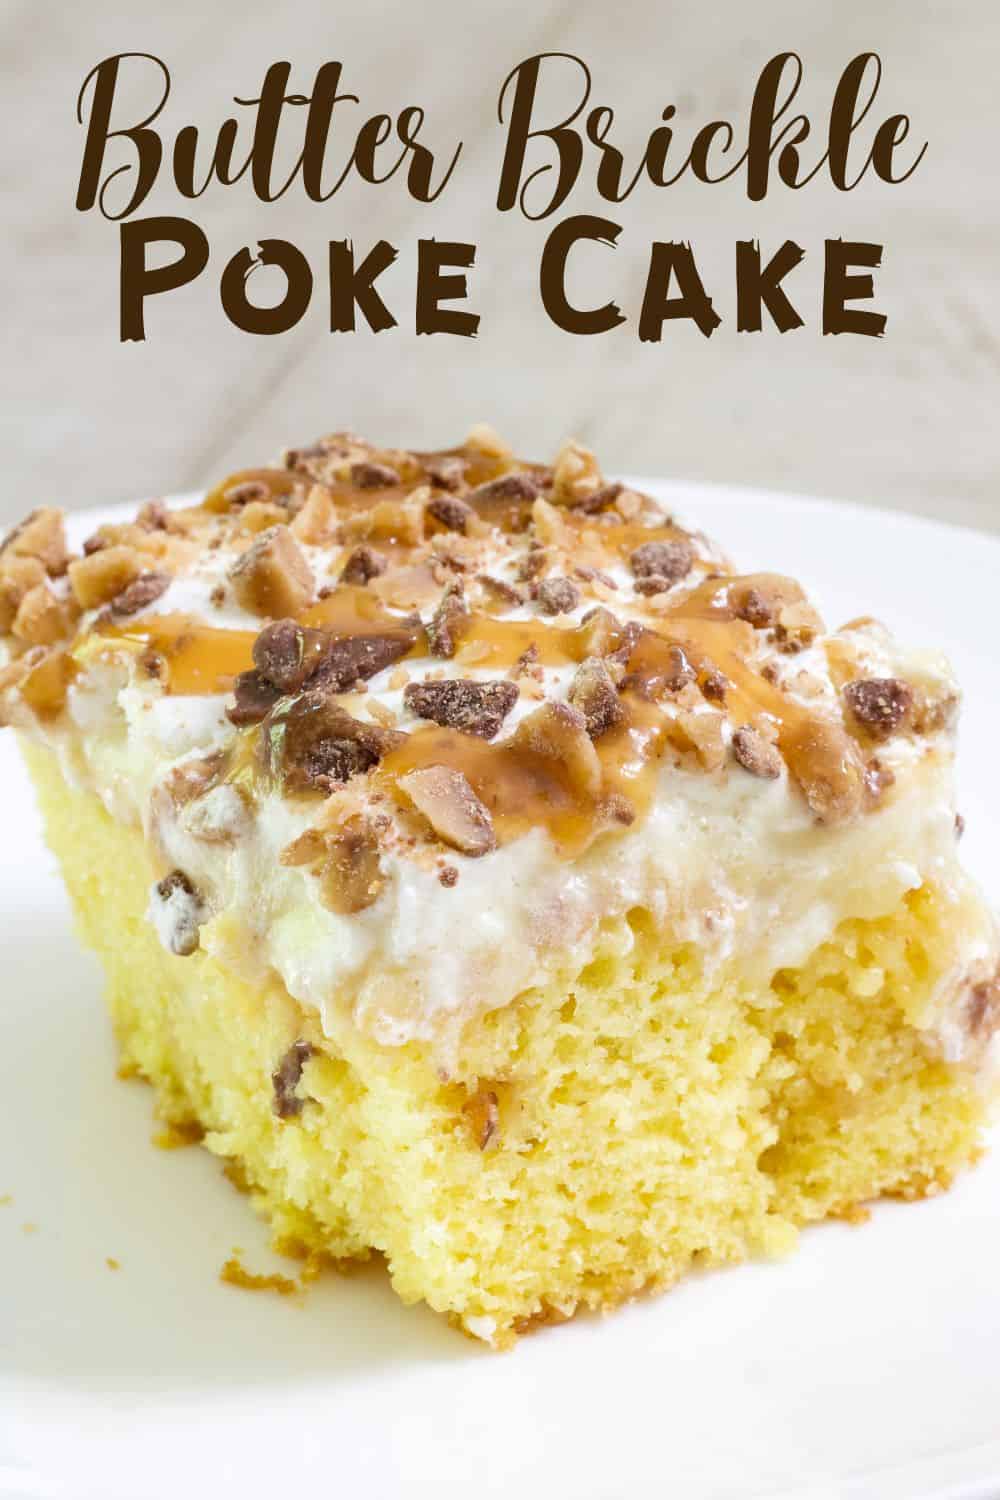 Butter Brickle Poke Cake is a delicious and decadent dessert that features a boxed yellow cake mix, pudding, caramel and Heath toffee bits.  via @mindyscookingobsession